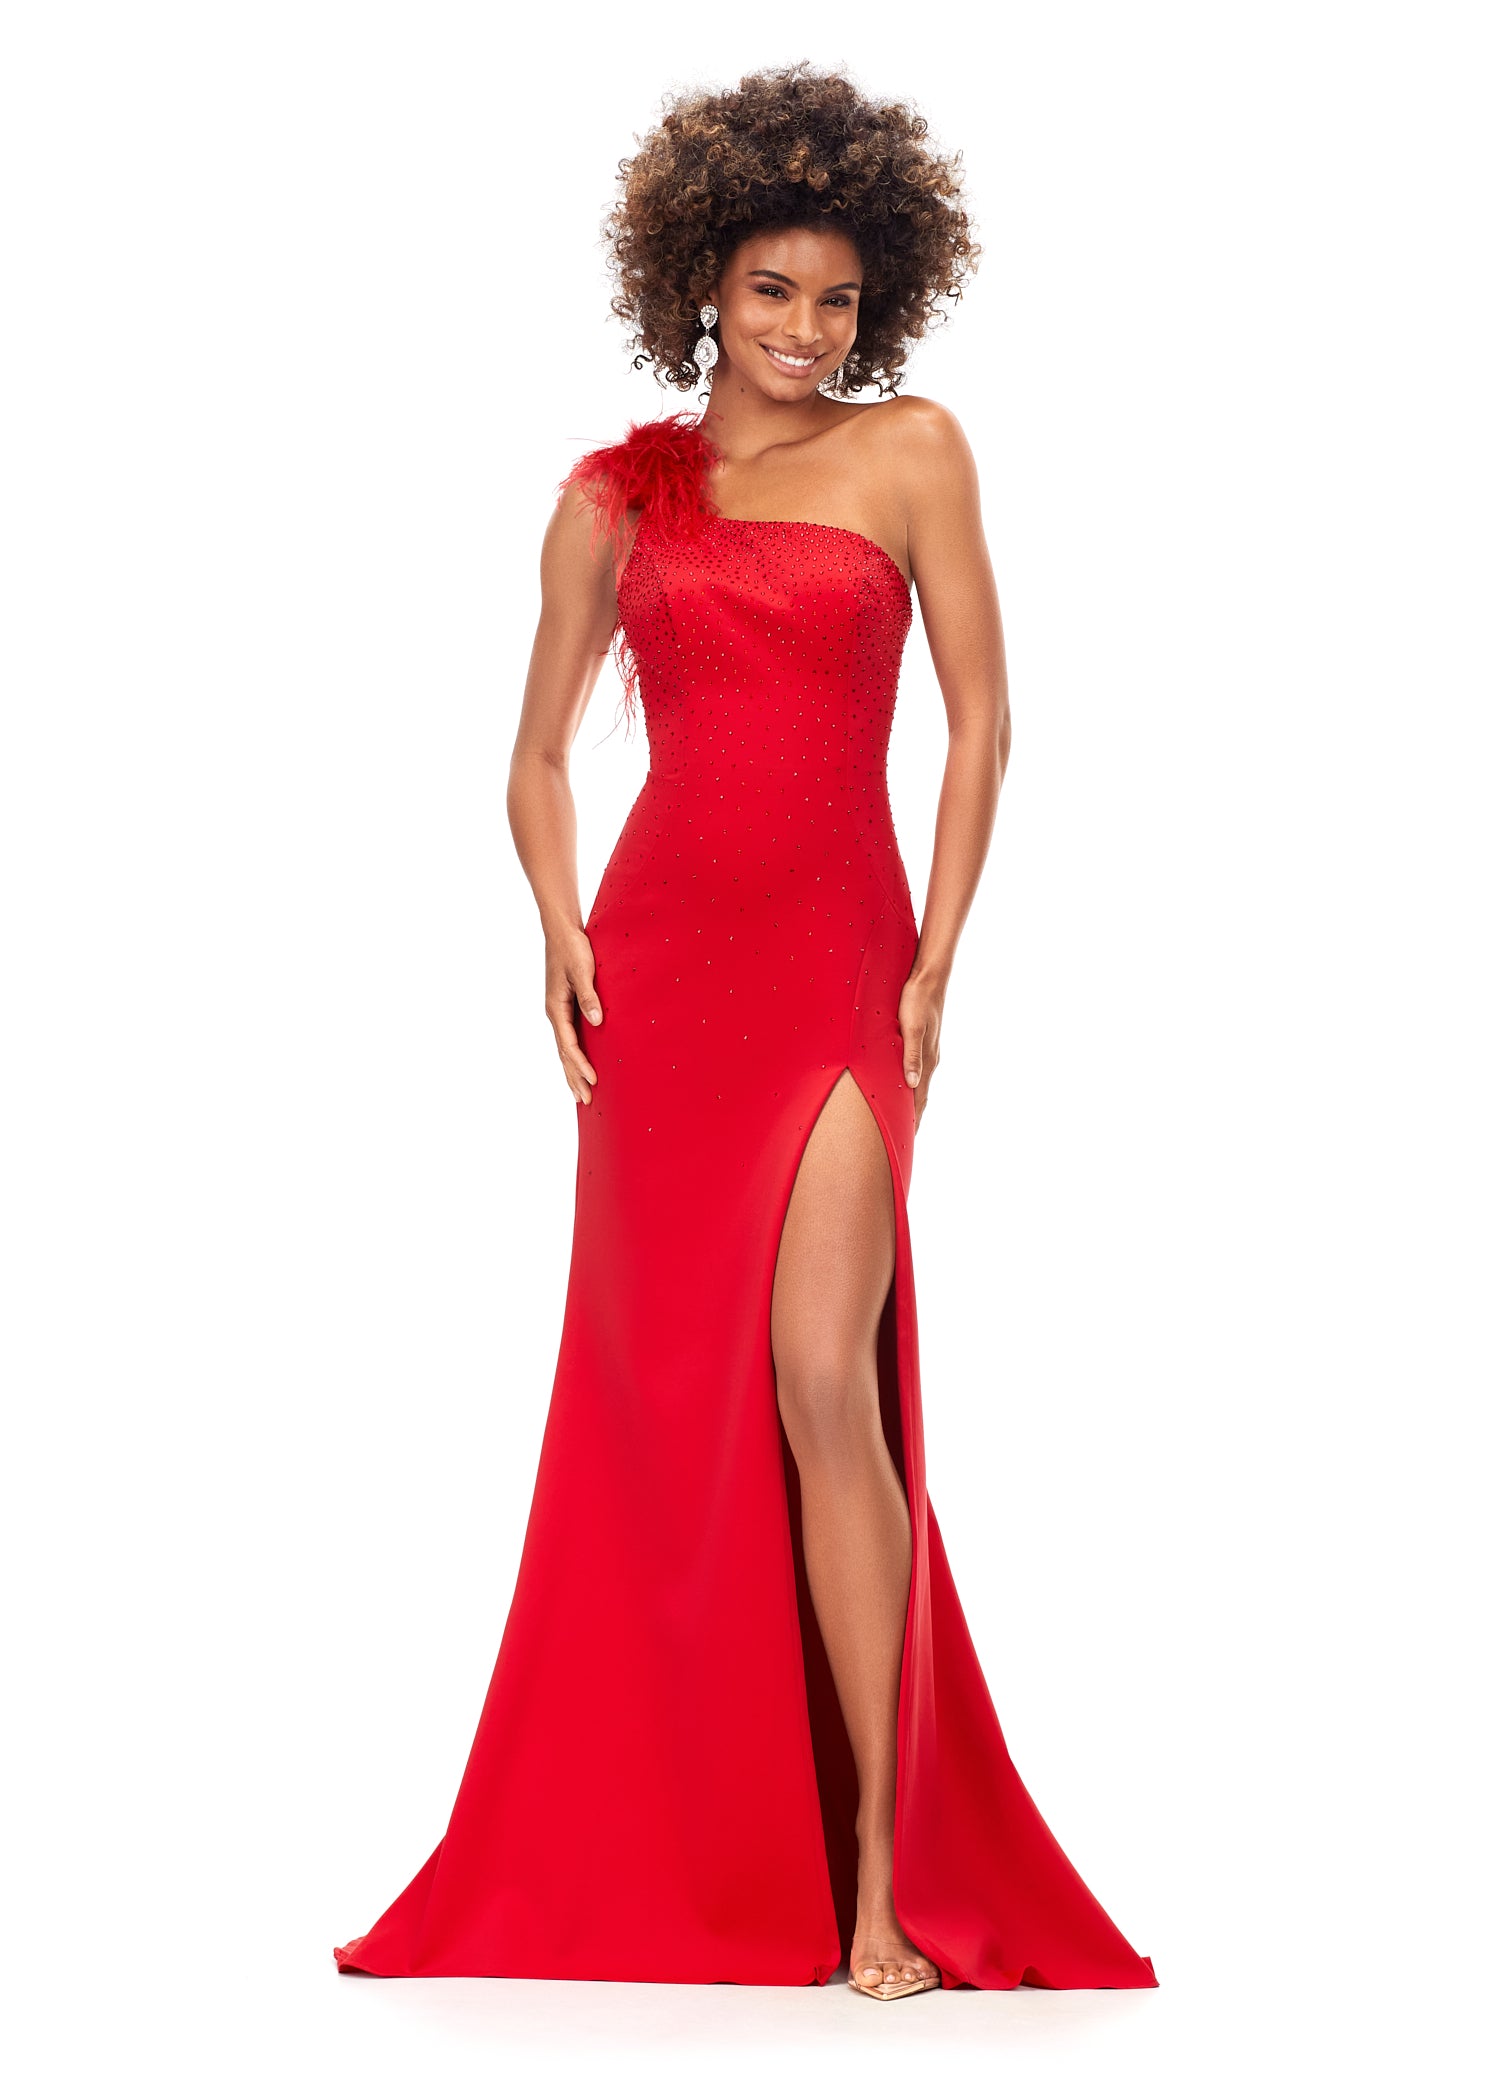 Ashley Lauren 11290 Red One Shoulder Prom Dress crystal top one shoulder with feathers  Stand out in this one shoulder scuba gown. The neckline is embellished with feathers to provide a fun and flirty detail. The bodice is accented by heat set stones that cascade down on the skirt. The look is complete with a left leg slit.